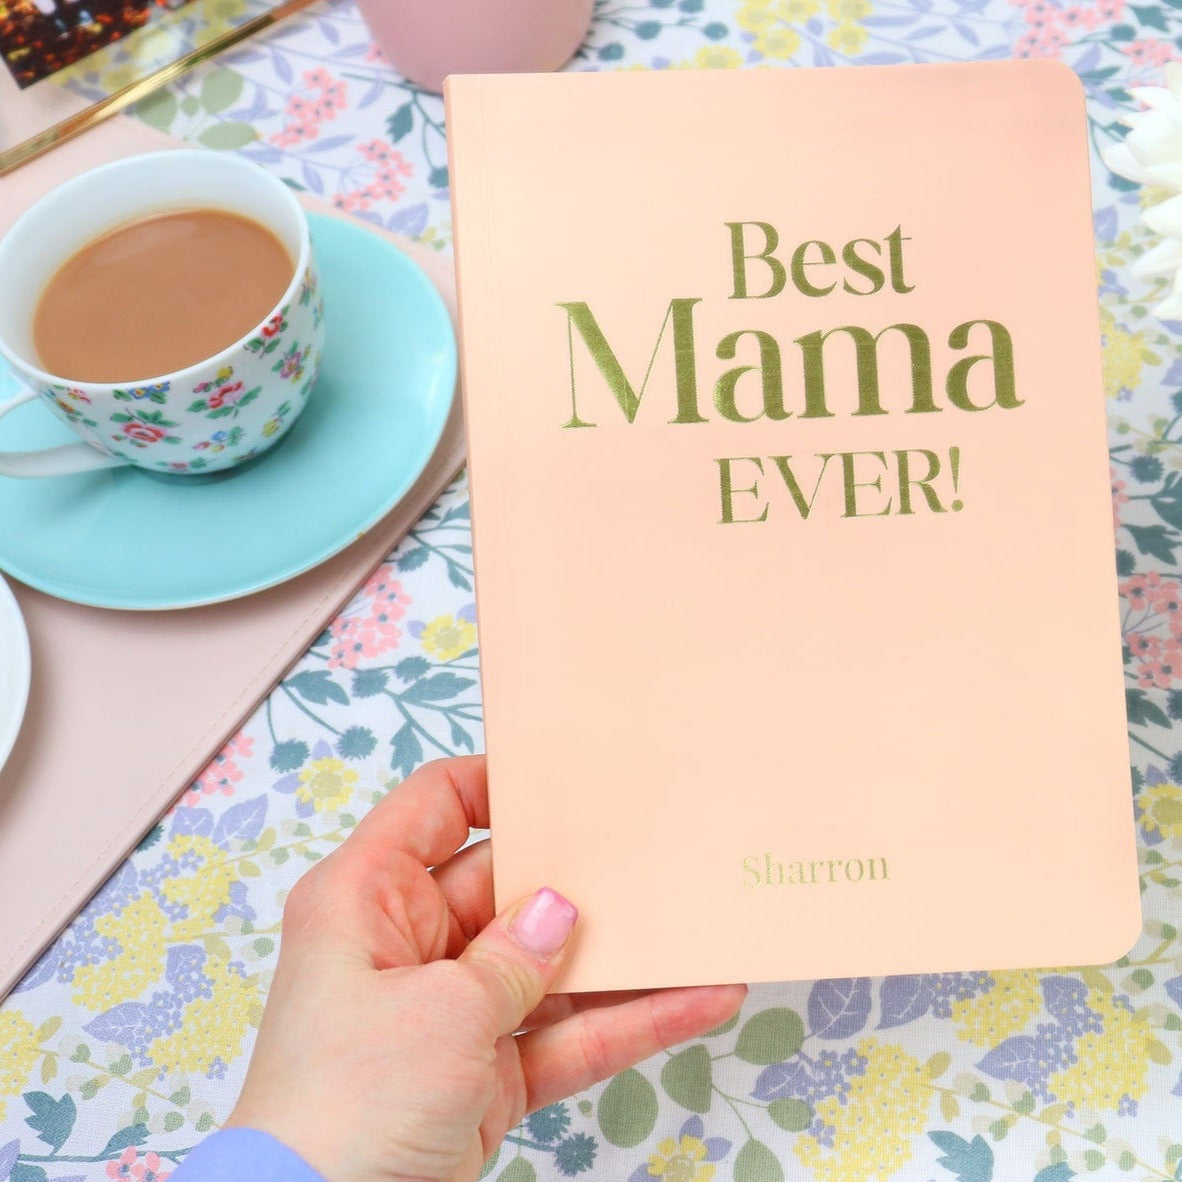 An A5 softback notebook in powder pink that says 'Best Mama Ever' with the name Sharron at the bottom all in gold foil